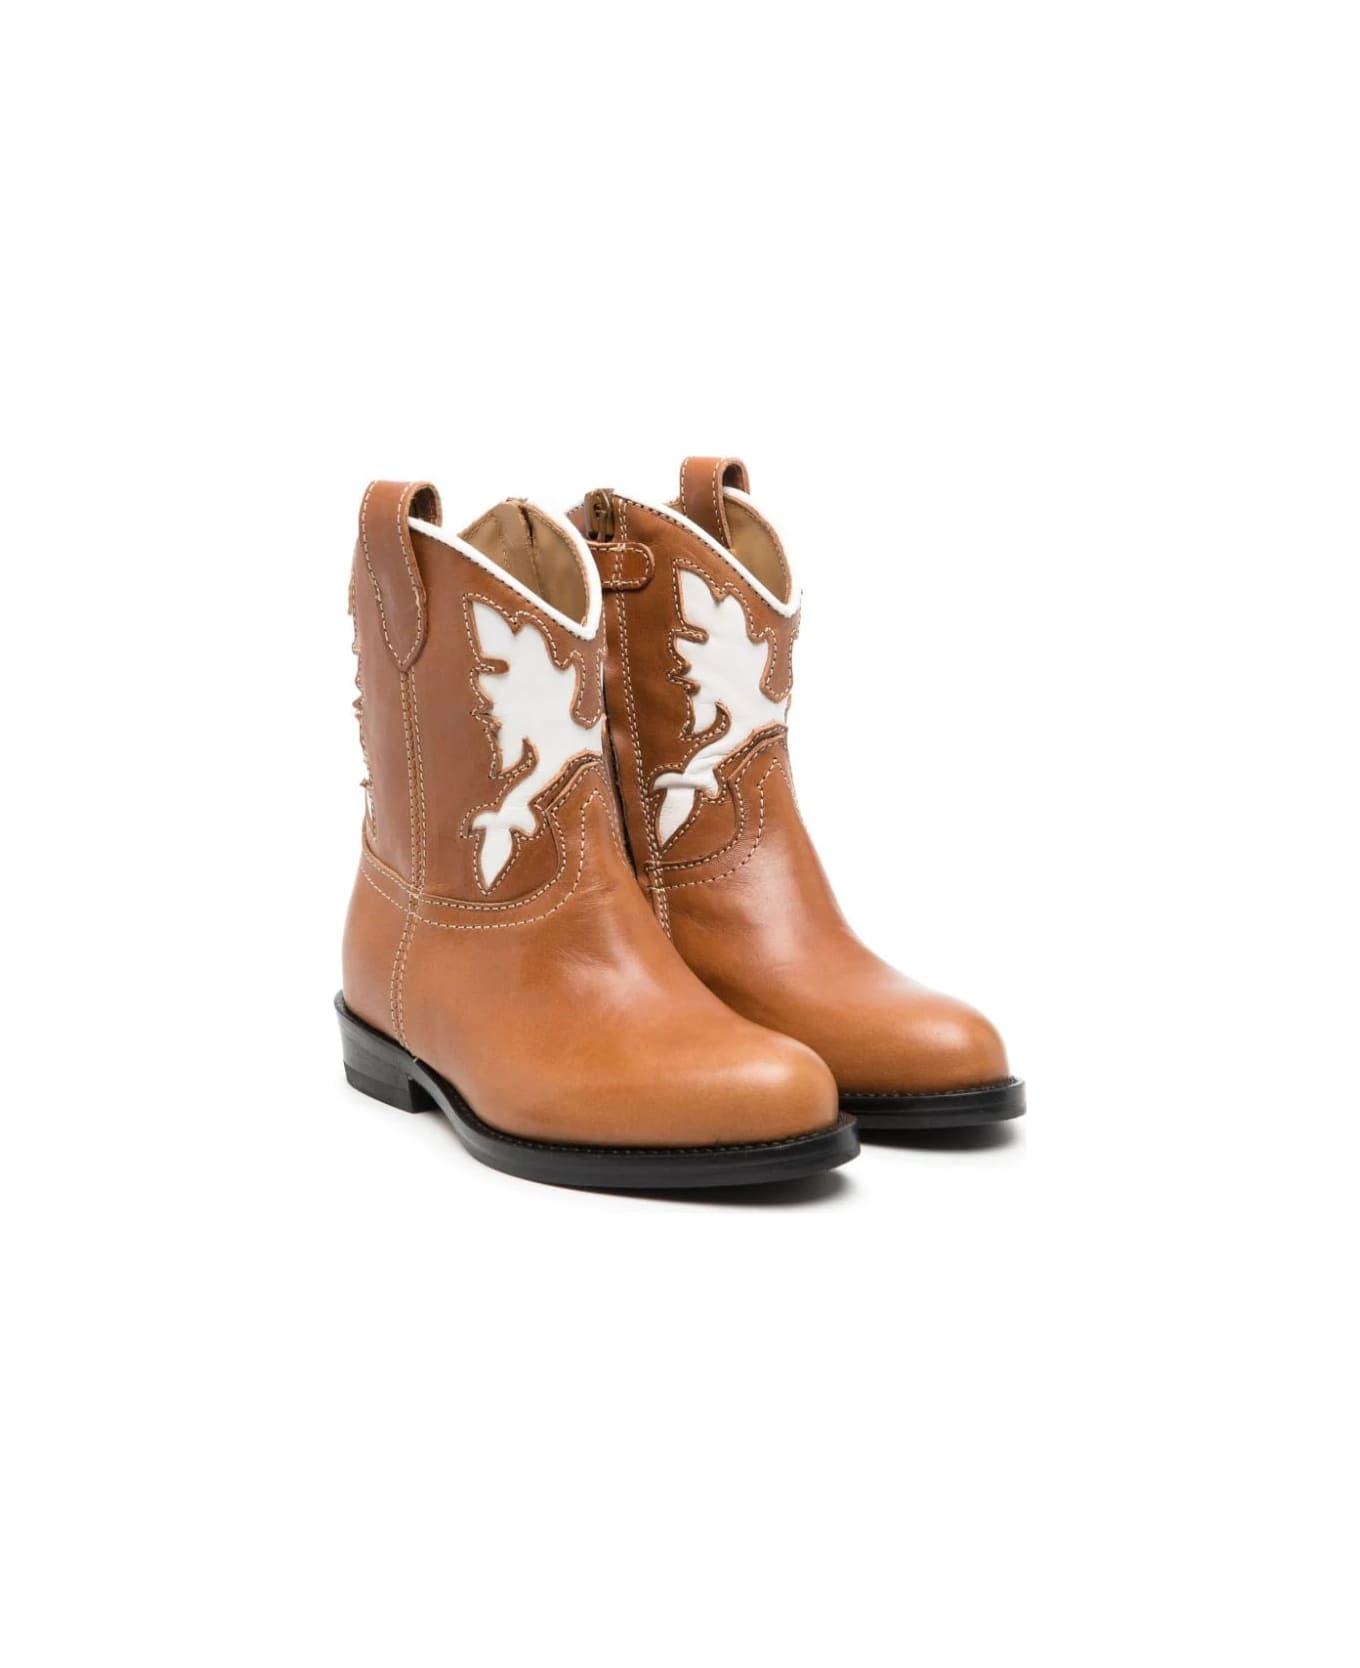 Gallucci Western Boots With Embroidery - Brown